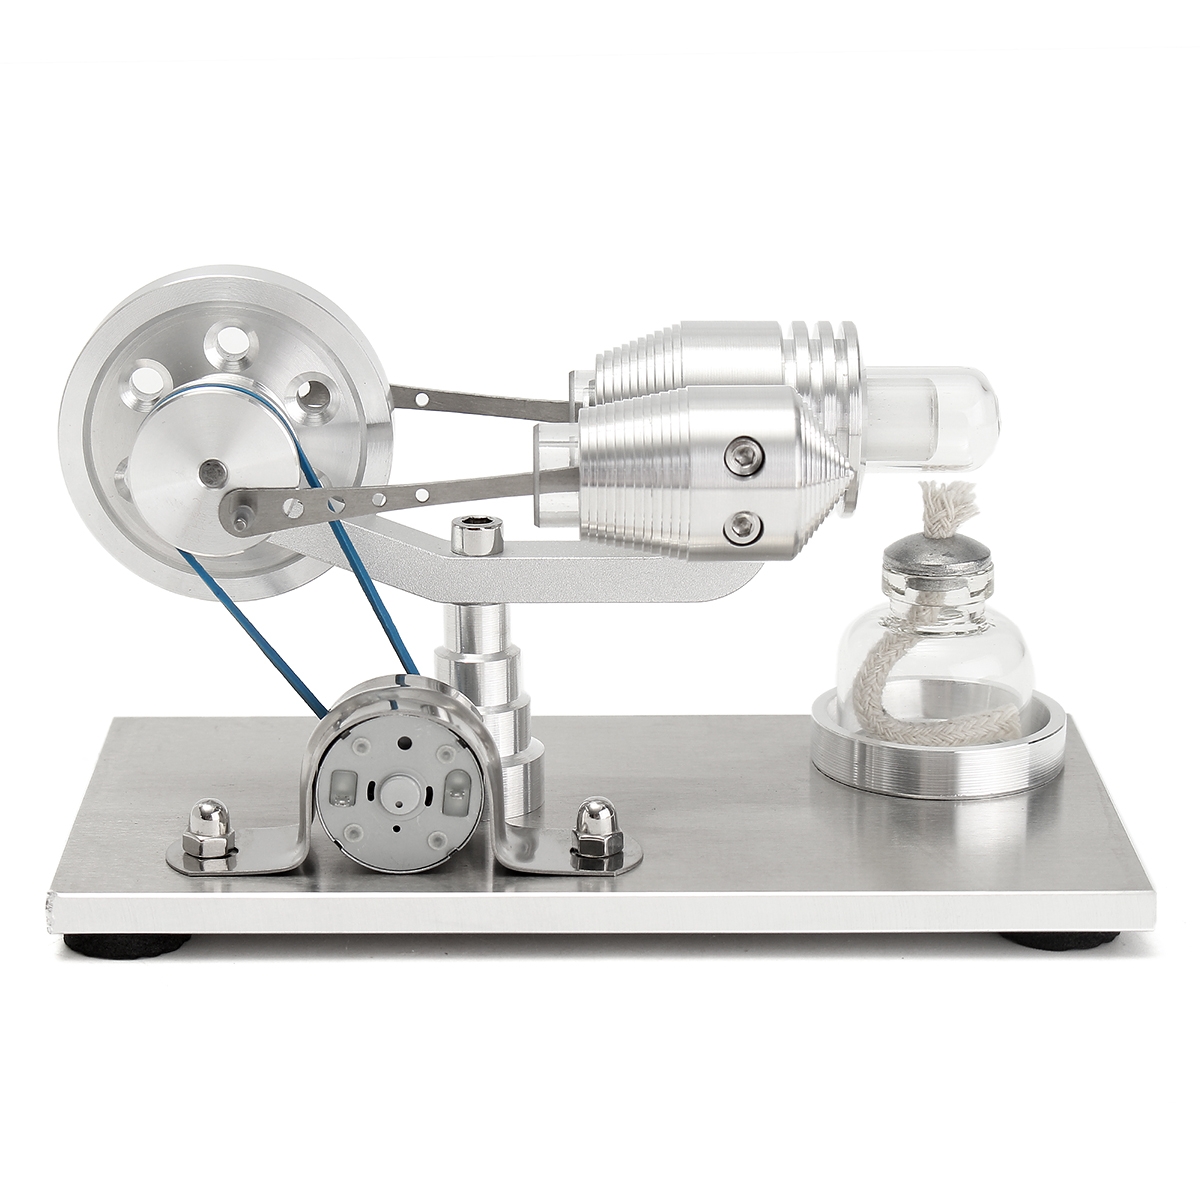 Stainless Steel Mini Hot Air Stirling Engine Motor Model Educational Toy Kits